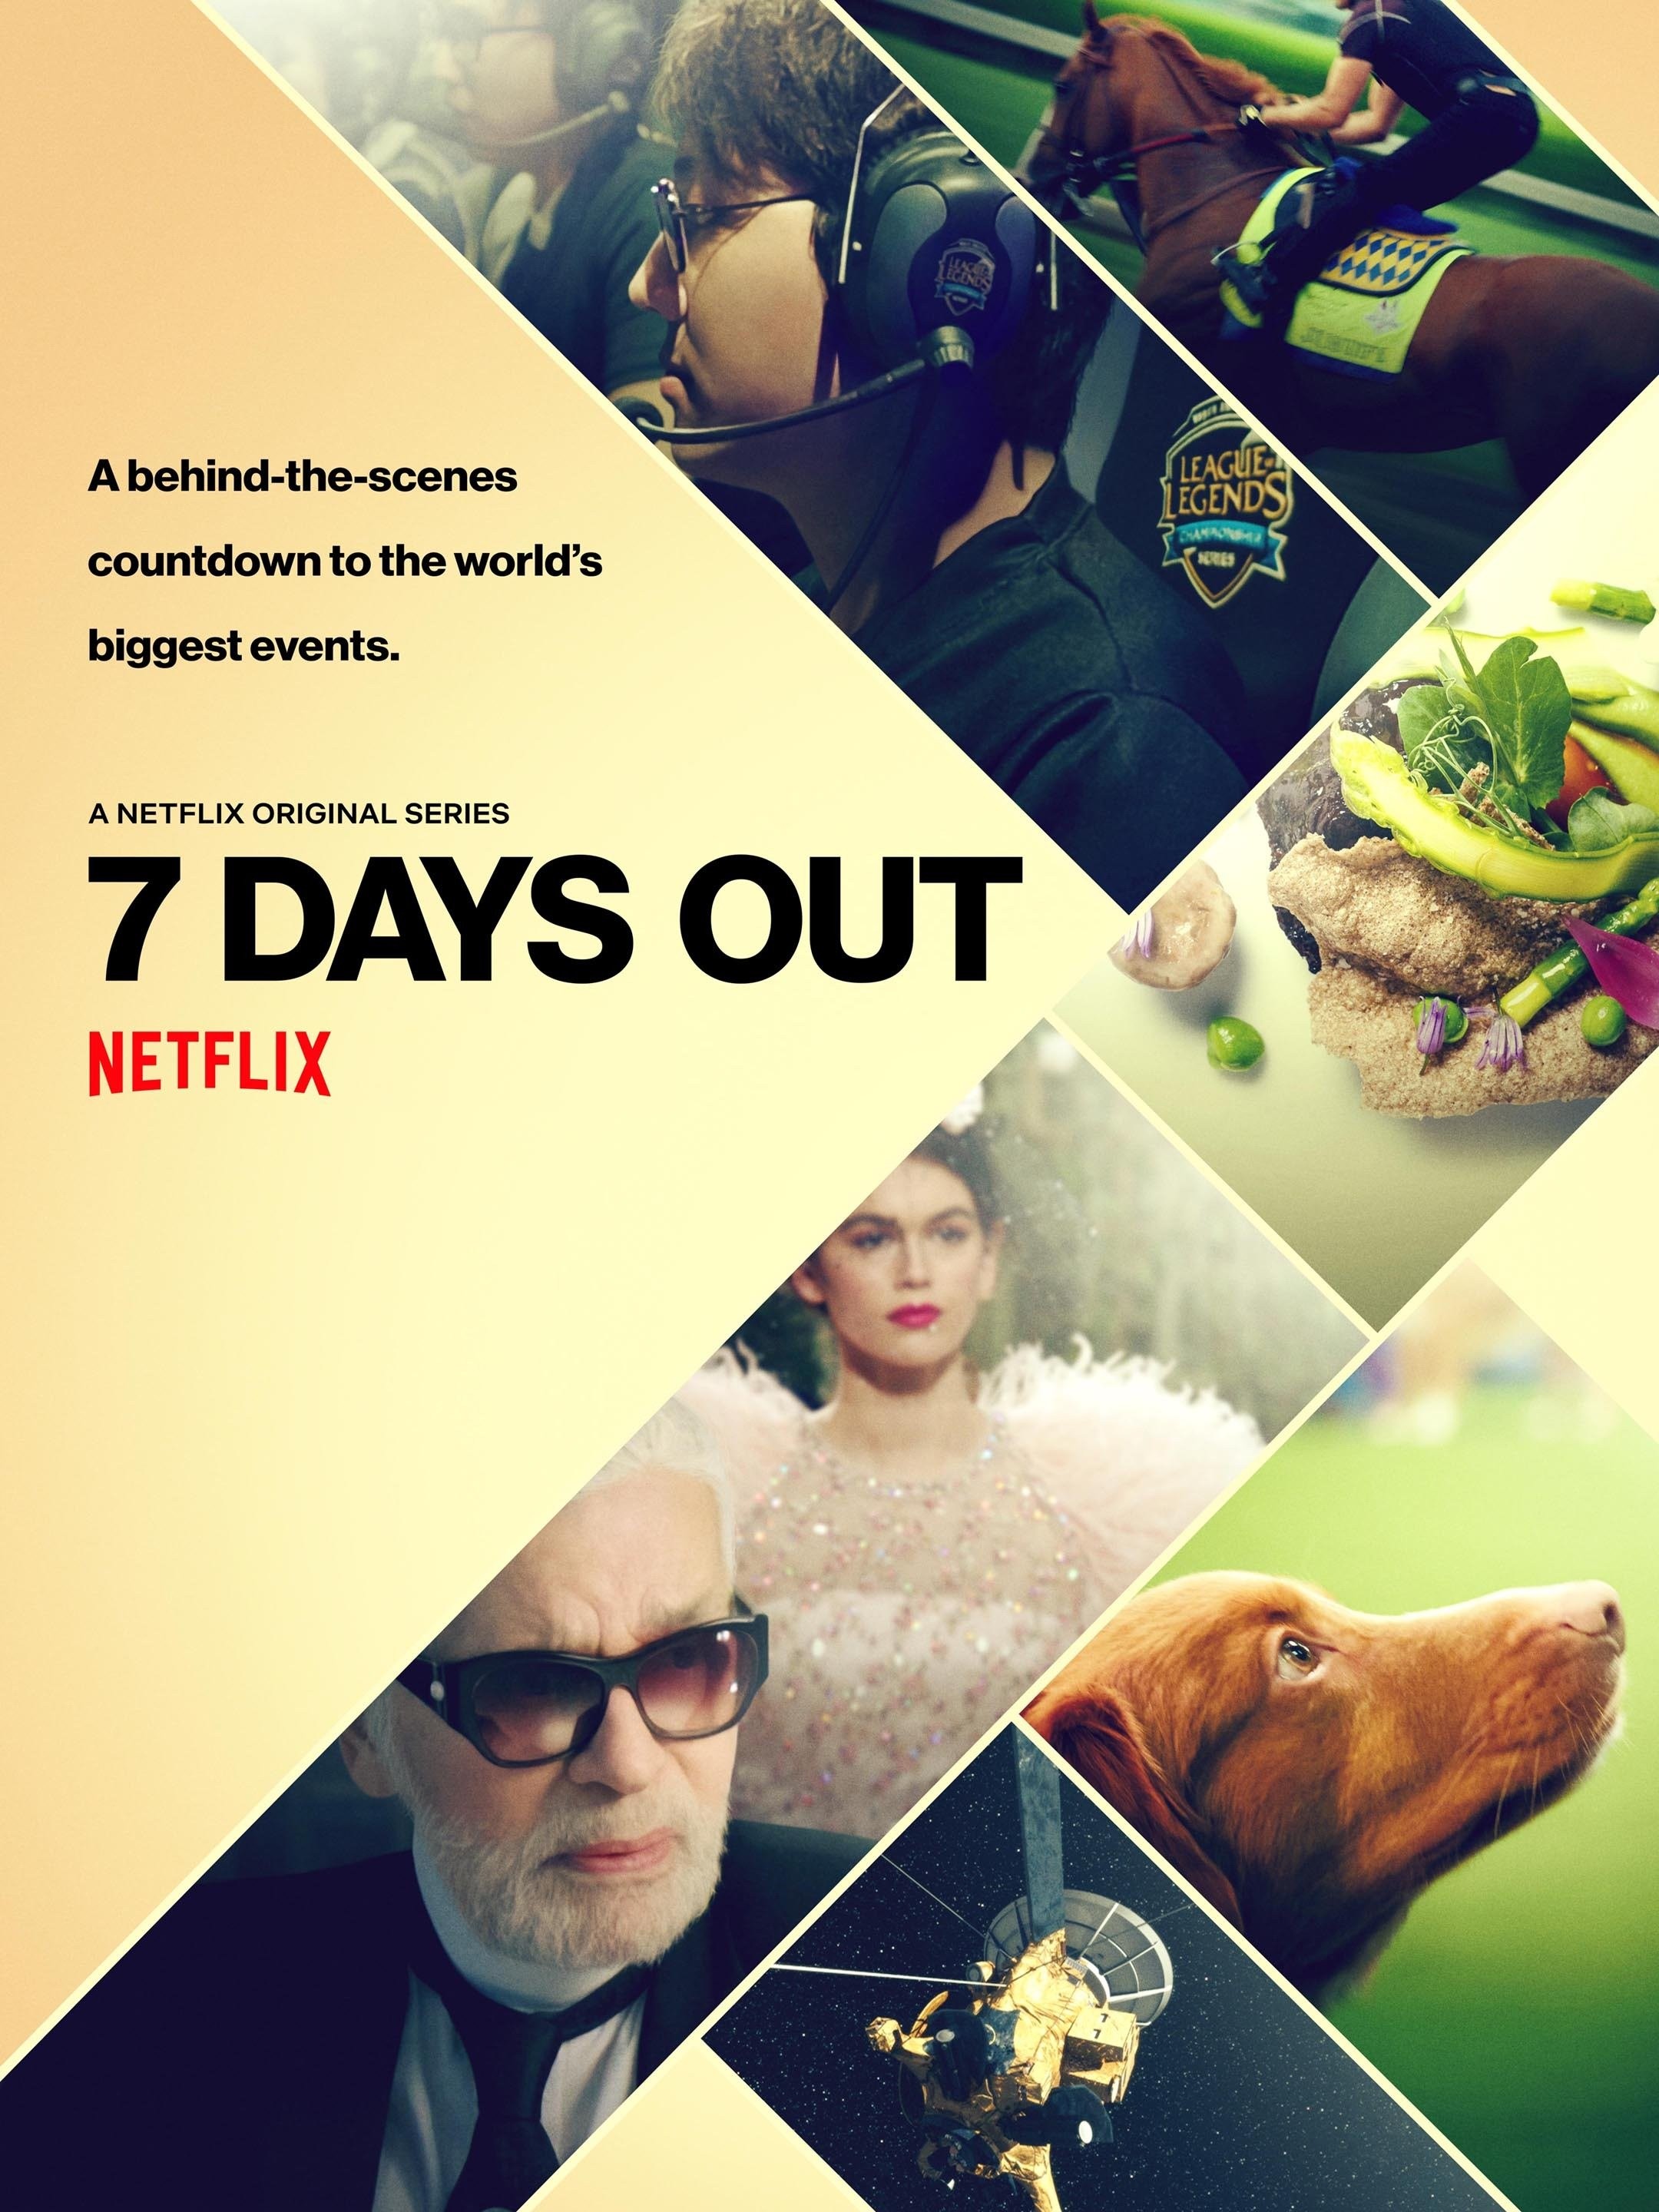 7 Days to Live - Rotten Tomatoes